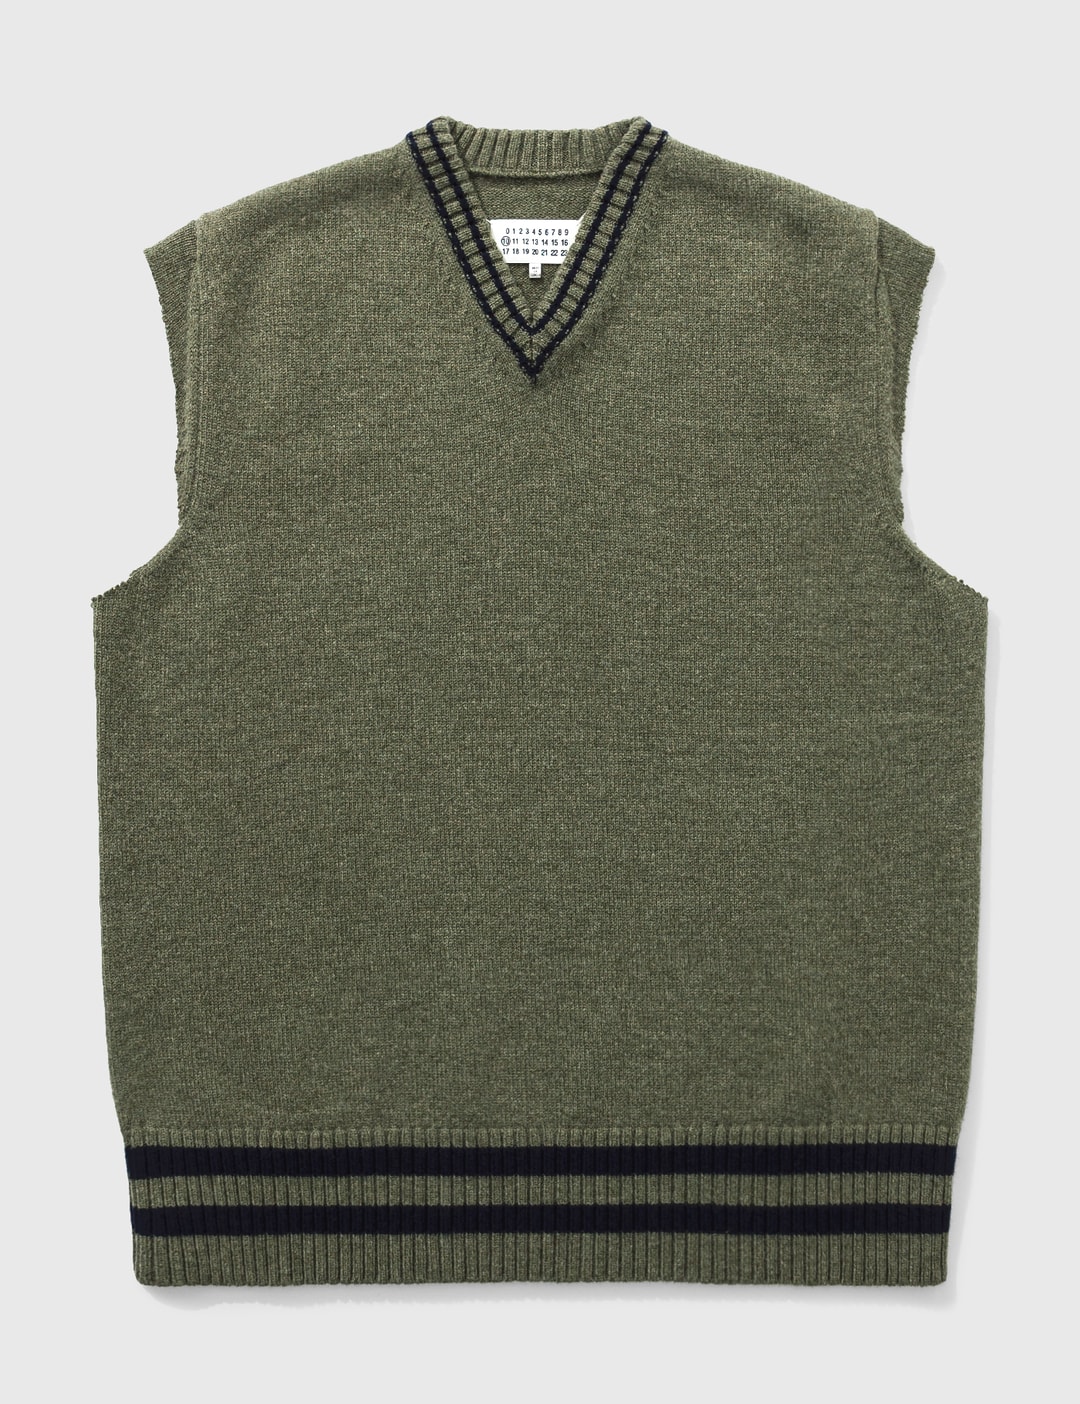 Maison Margiela - Contrast Stripe Knitted Vest | HBX - Globally Curated ...